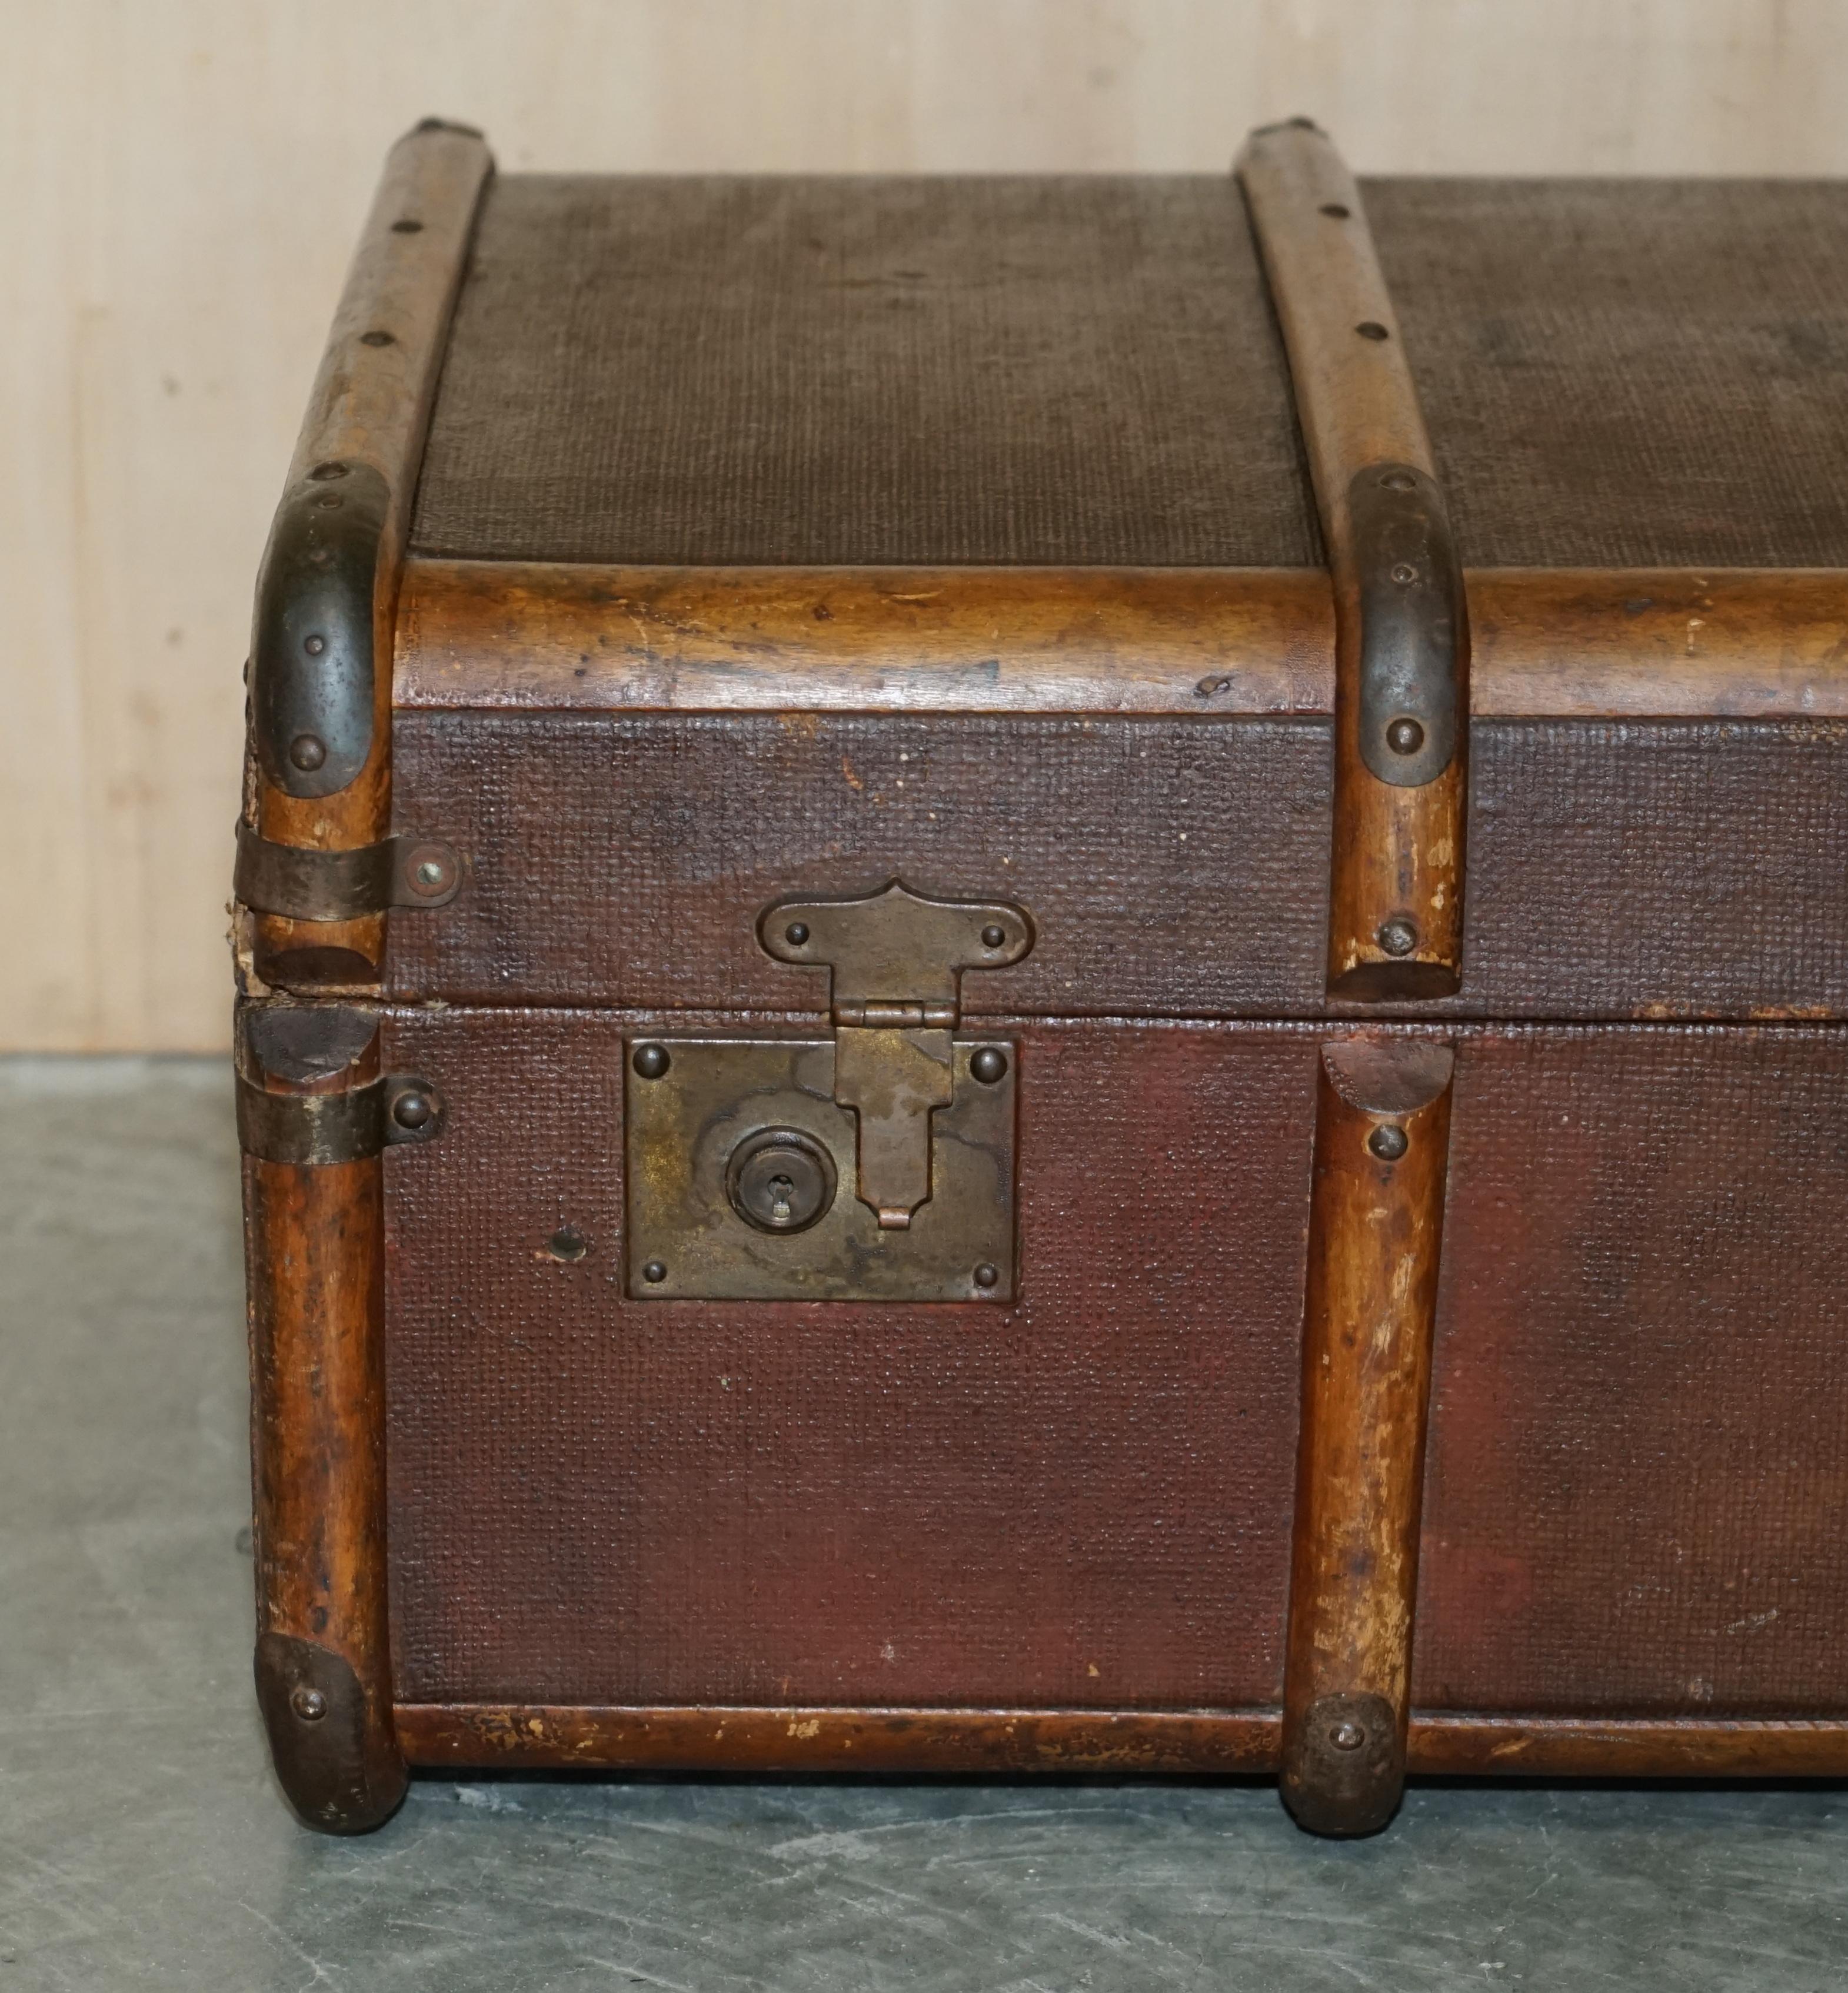 ANTIQUE ViCTORIAN LEATHER ELM & CANVAS STEAMER TRUNK CHEST COFFEE TABLE MUST SEE (Englisch) im Angebot